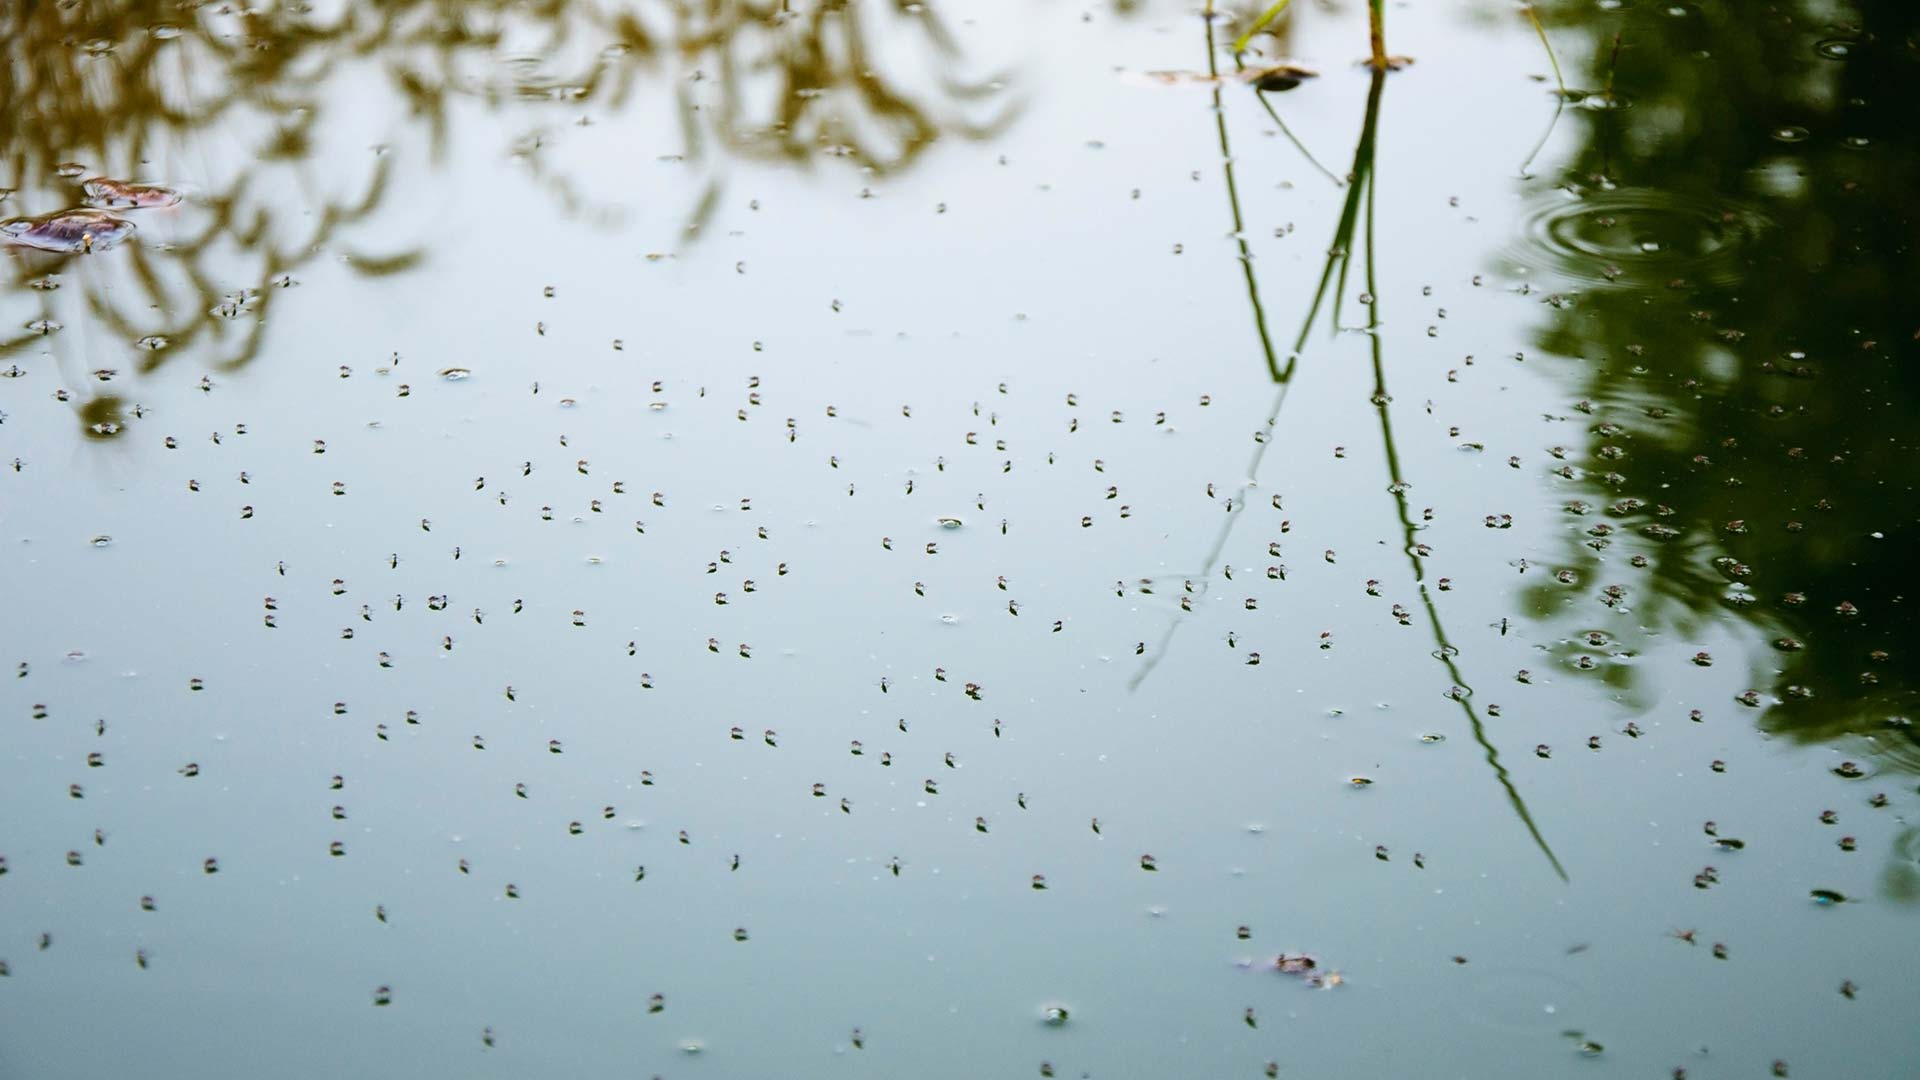 Mosquitoes spawning on water in Carmel, IN.